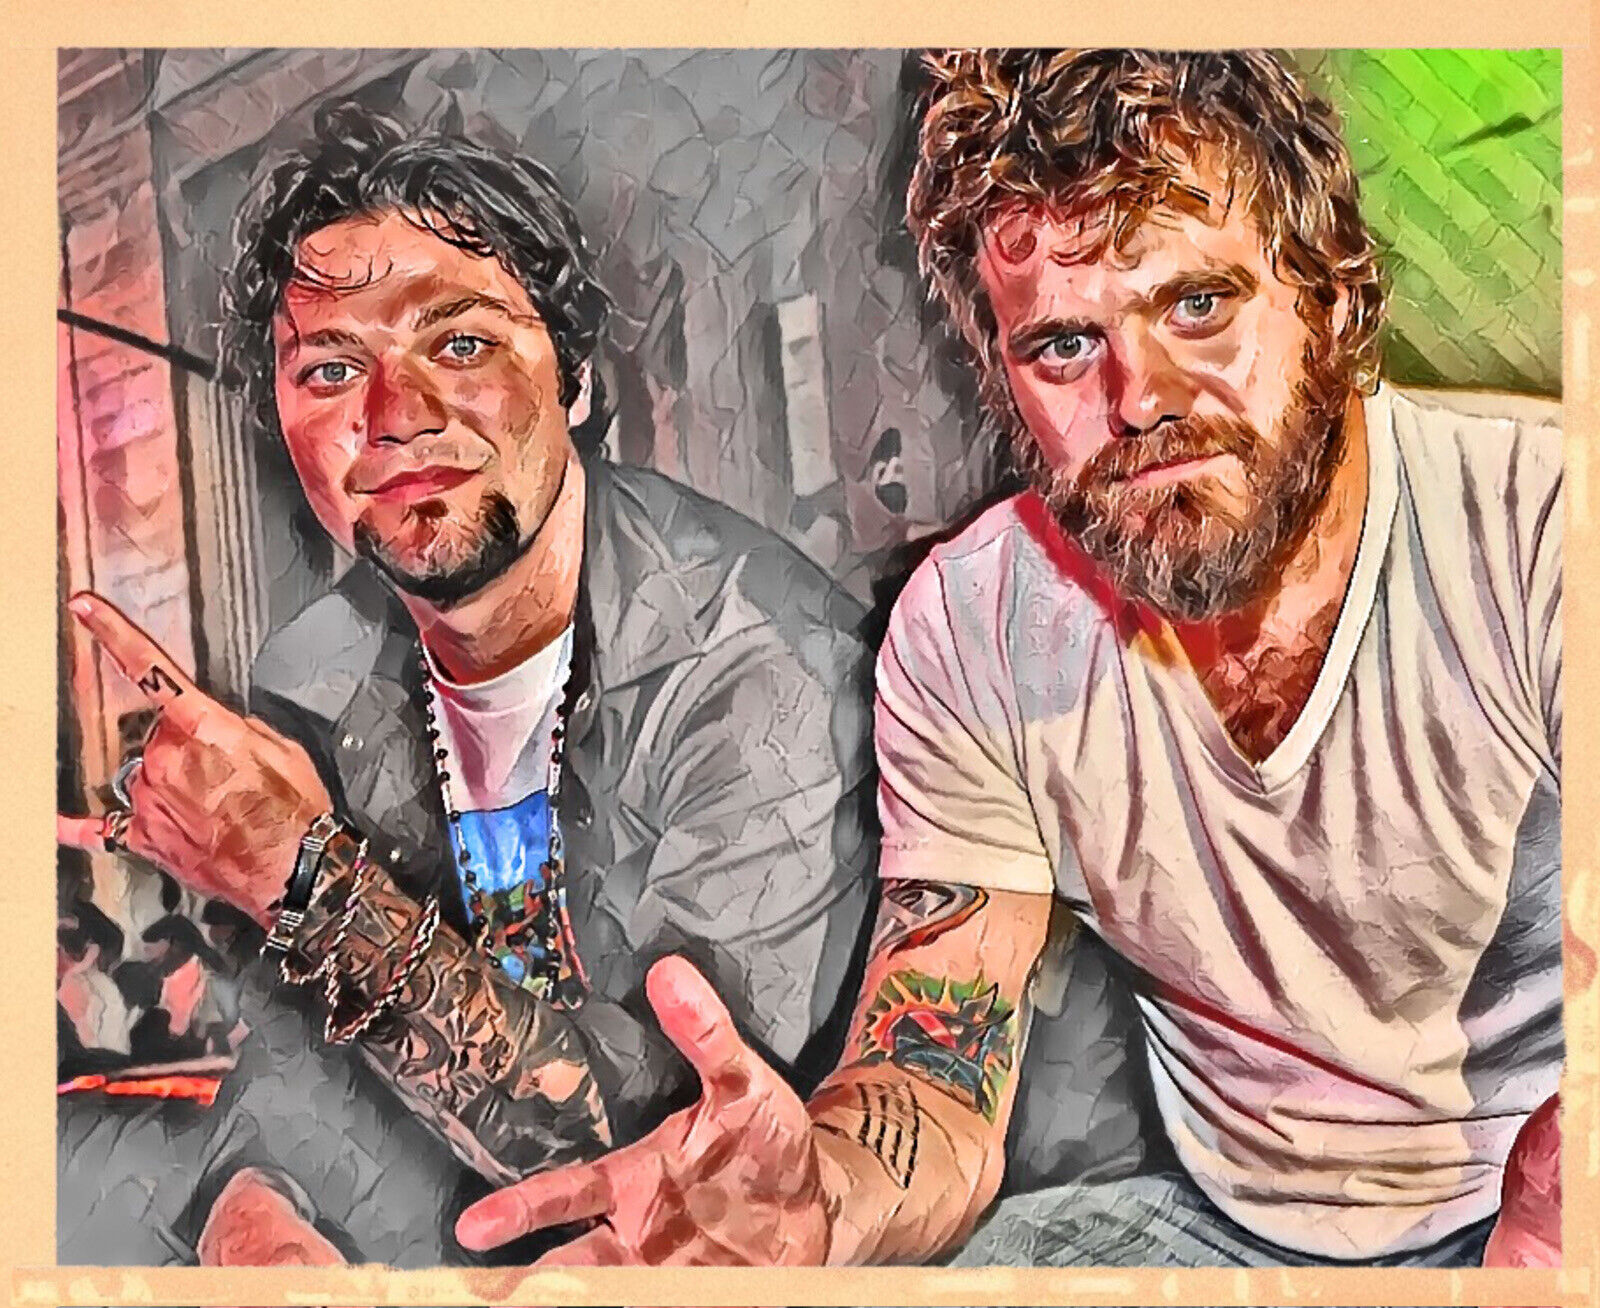 Bam Margera And Ryan Dunn Art Card Limited /12 MPRINTS Signed By Artist